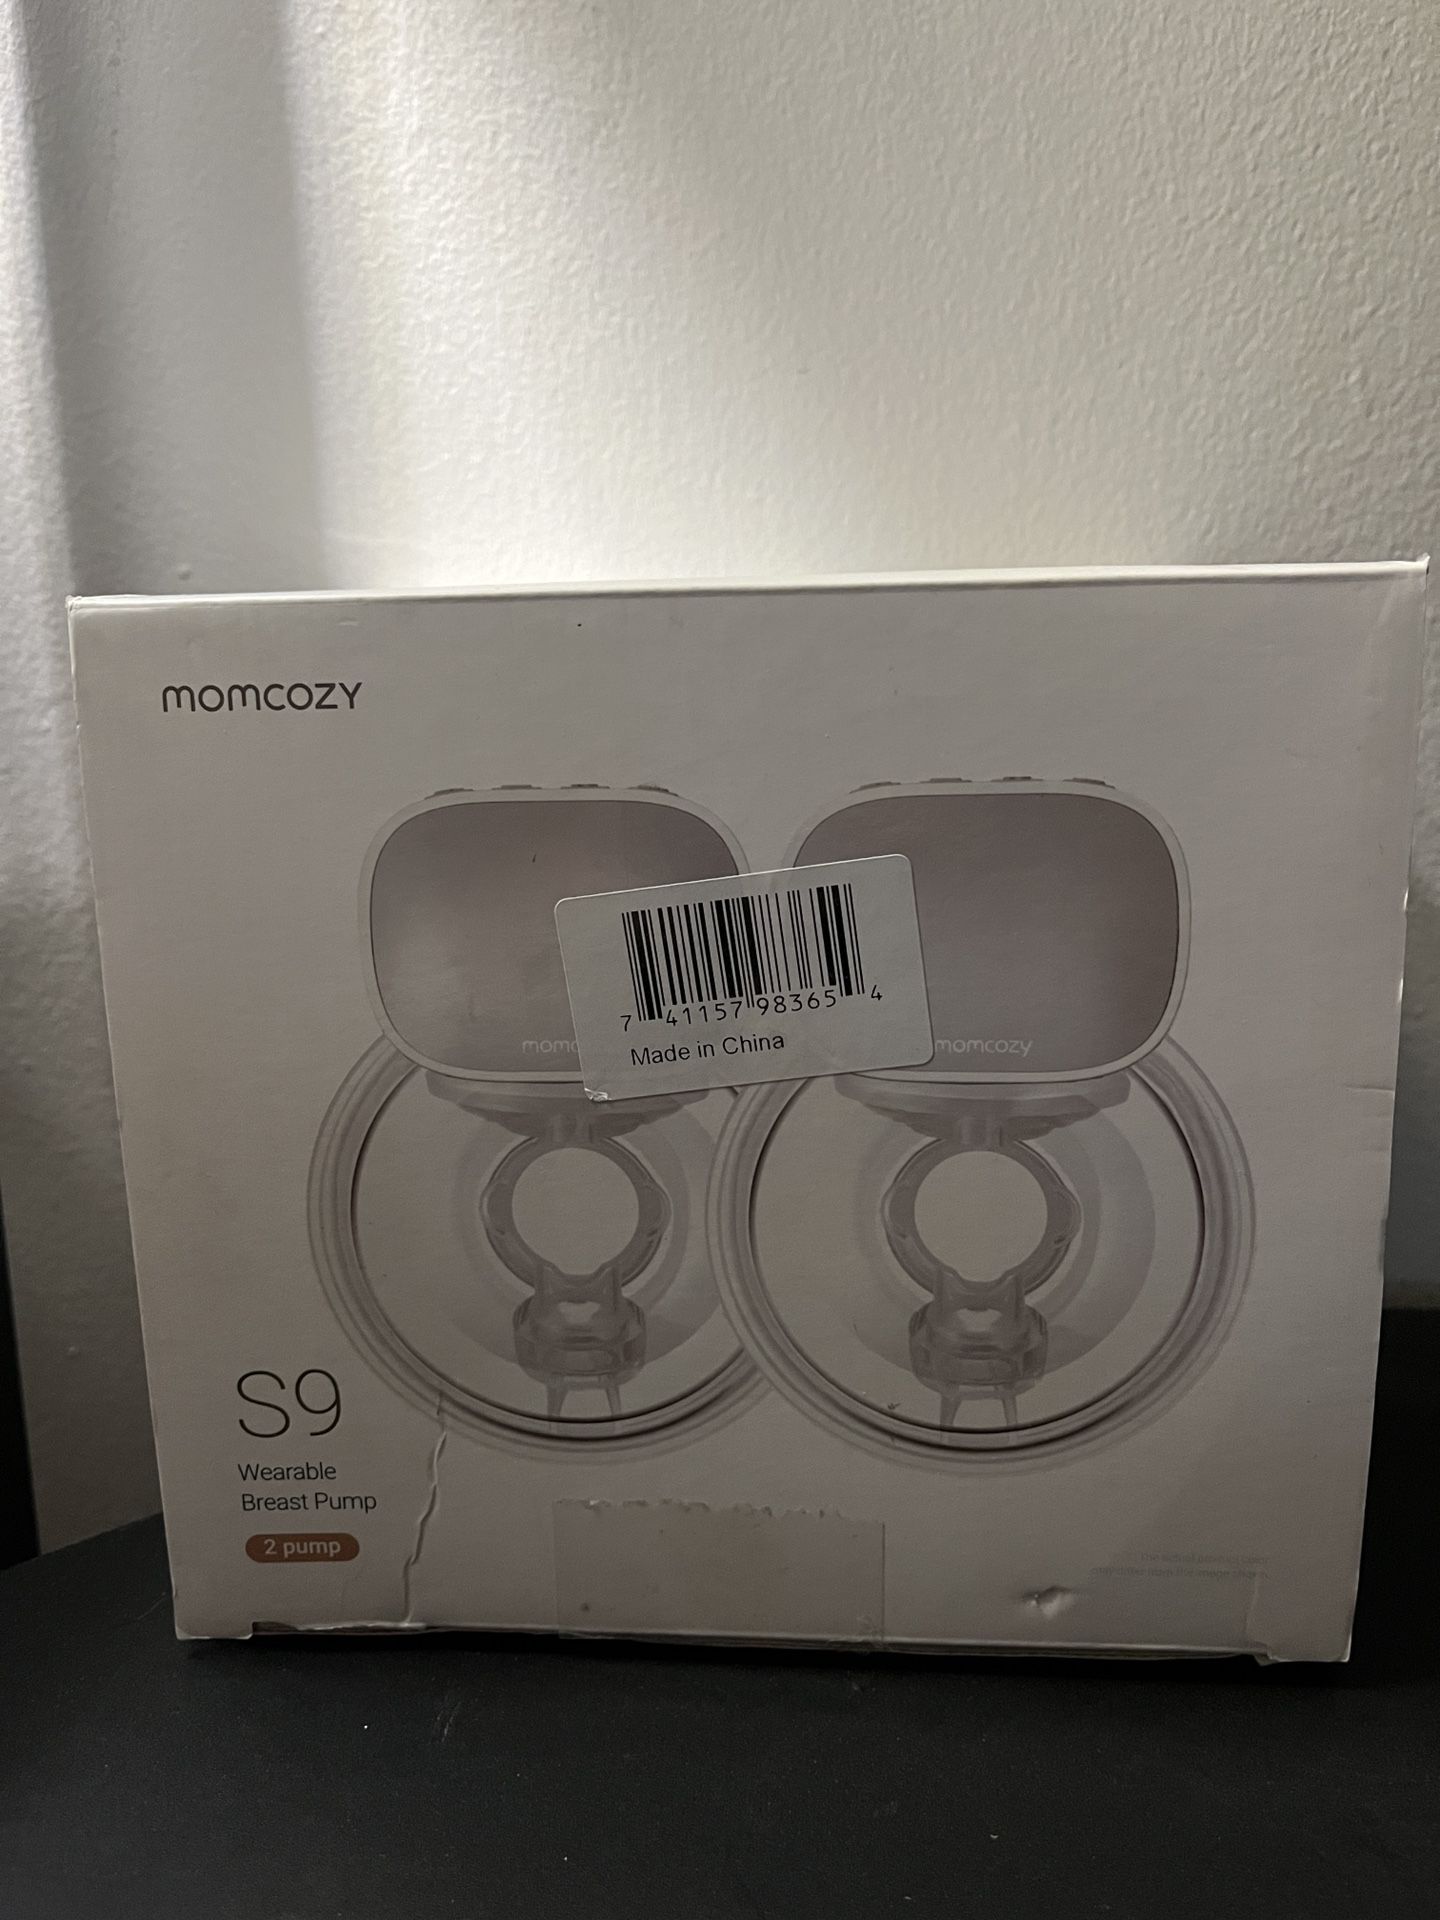 MomCozy S9 Wearable Breast Pumps